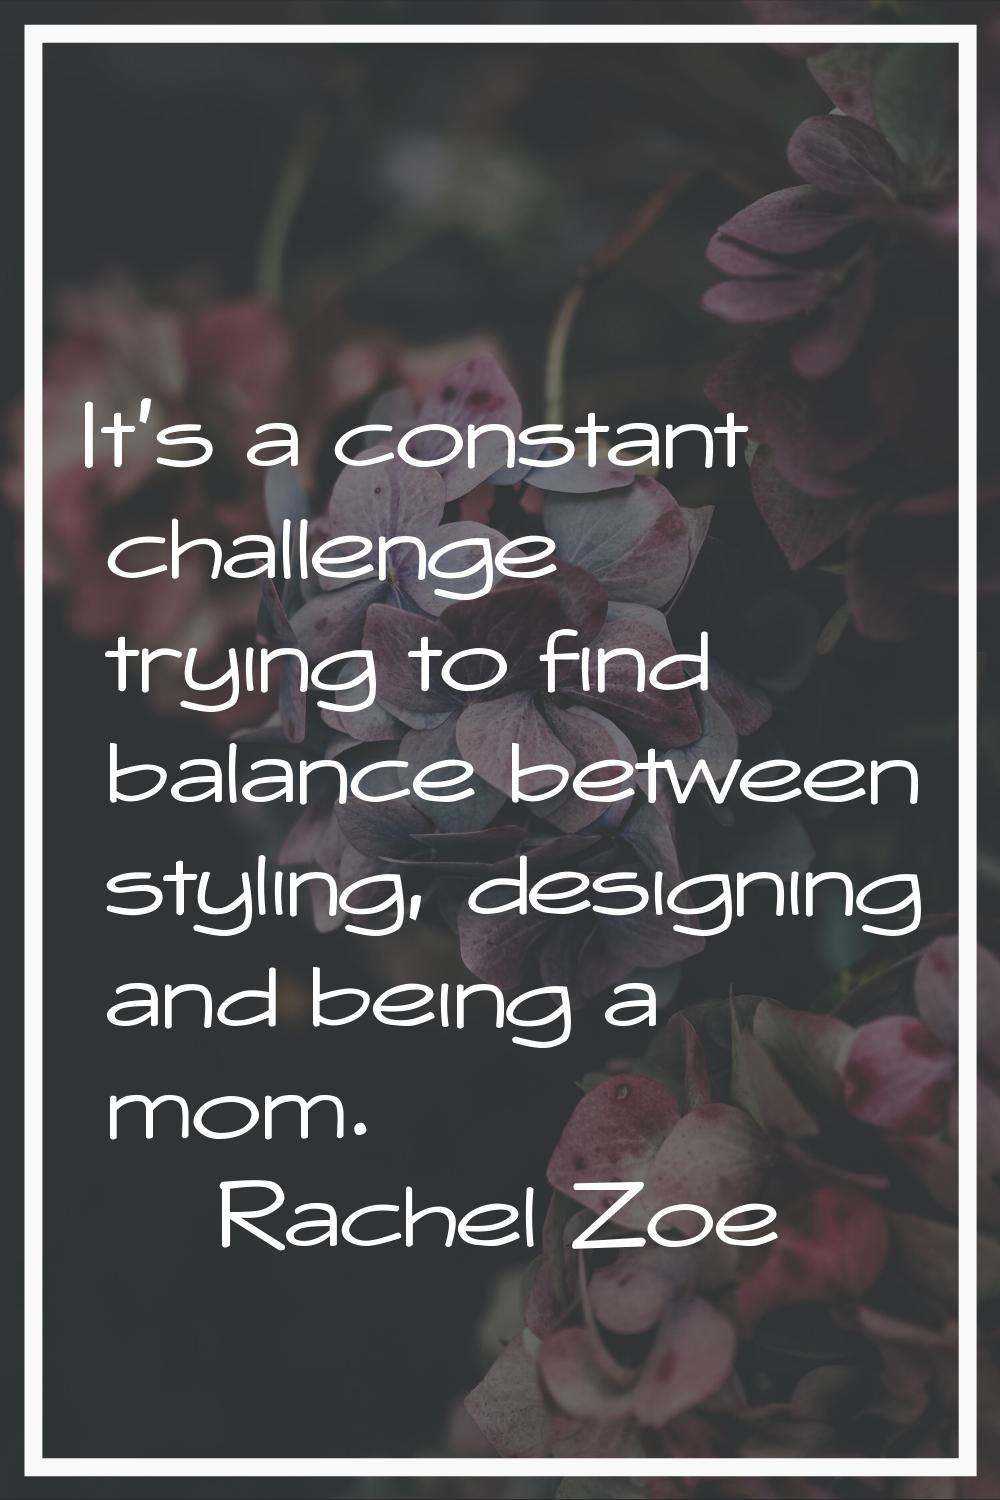 It's a constant challenge trying to find balance between styling, designing and being a mom.